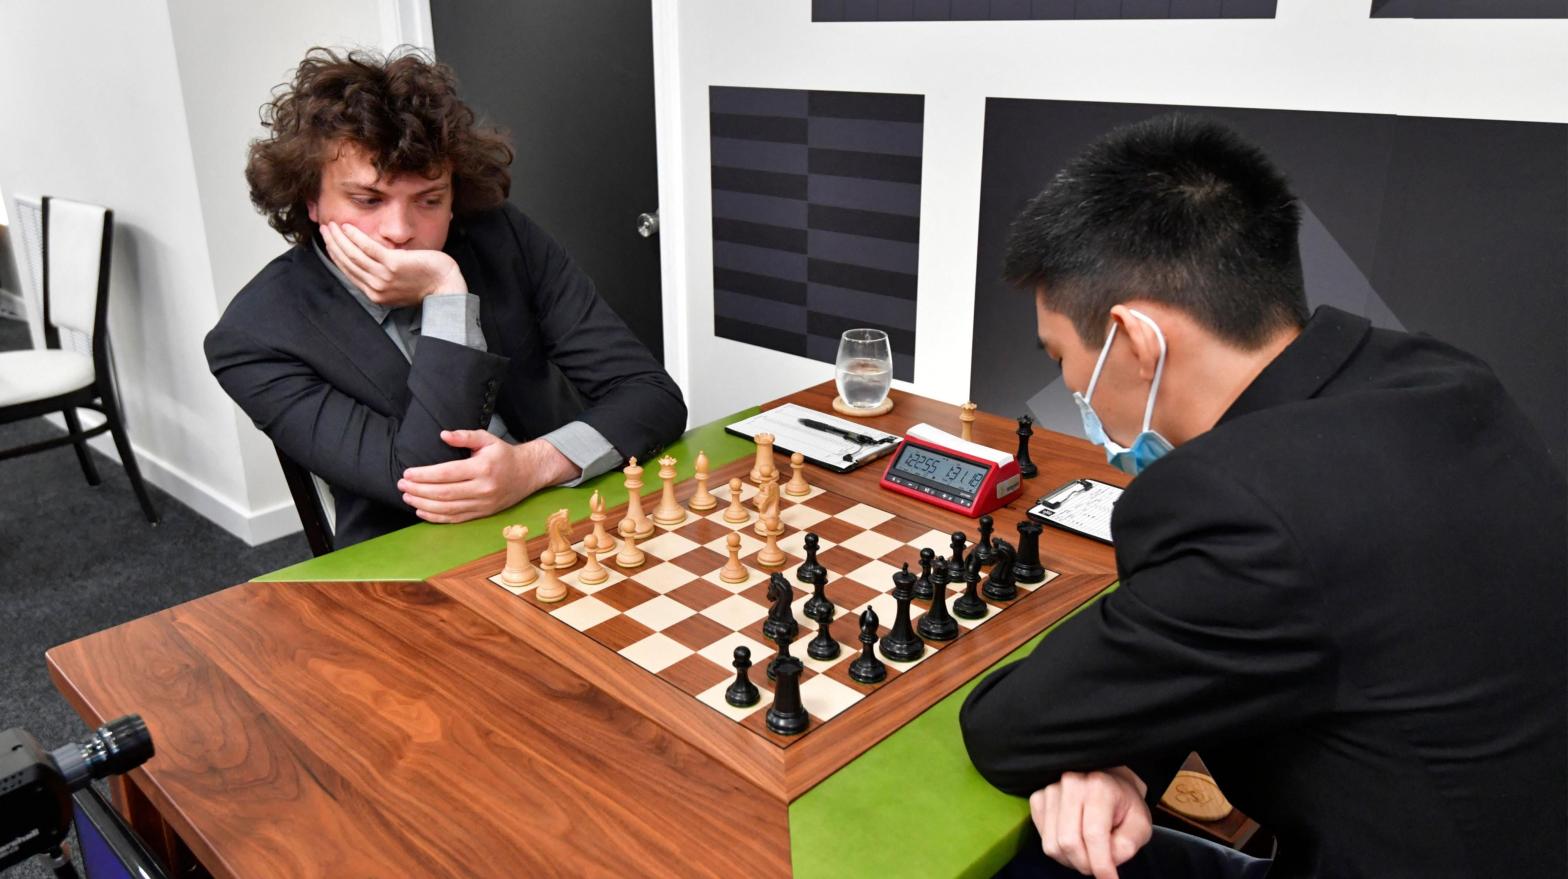 Hans Niemann has been accused of cheating at chess, but there has been little proof offered to how he might be cheating at over-the-table chess compared to past accusations of cheating at online chess. (Photo: TIM VIZER/AFP, Getty Images)